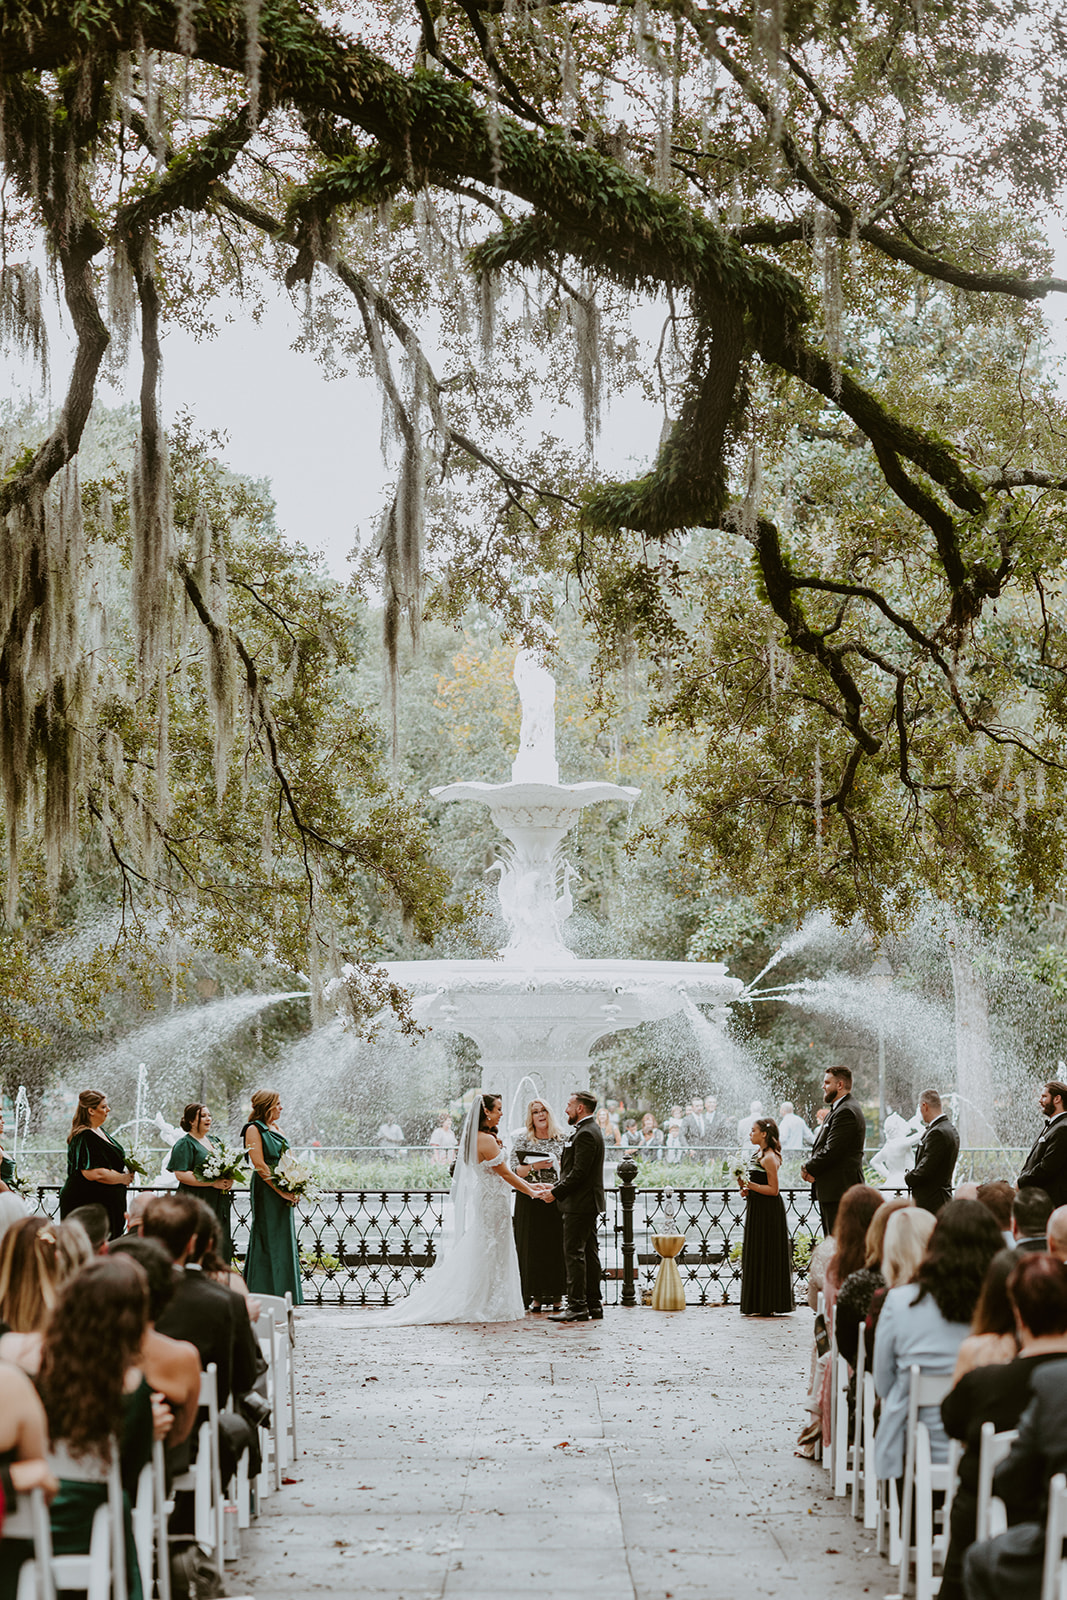 A couple who got married in Savannah, Georgia, had their ceremony at Forsyth Fountain